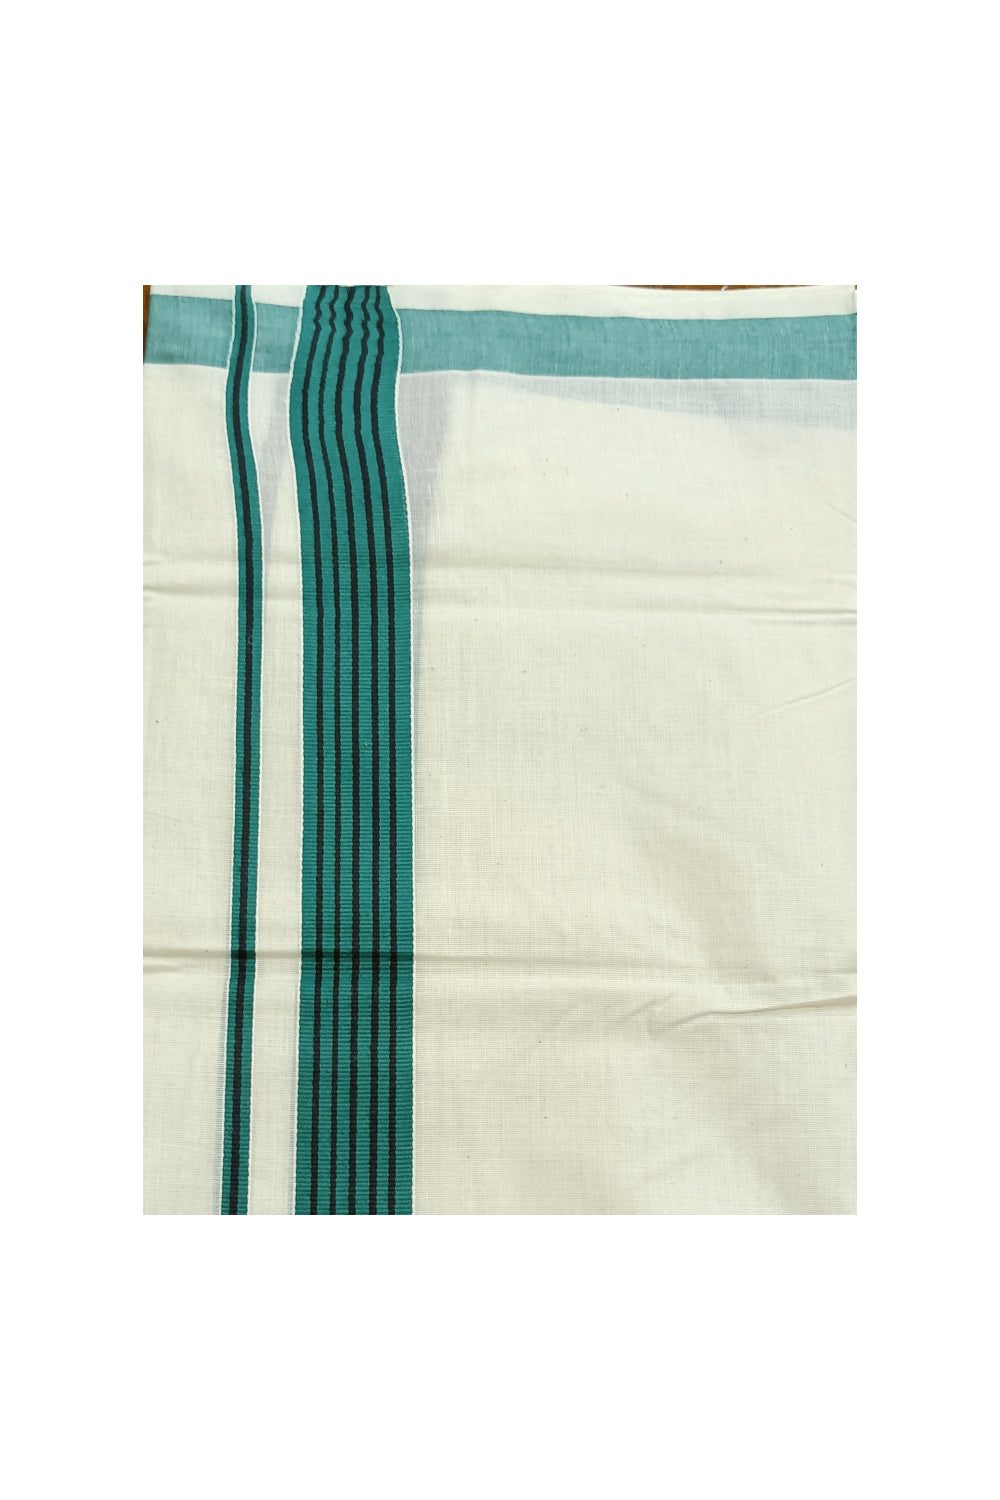 Off White Kerala Double Mundu with Black Lines on Green Border (South Indian Dhoti)